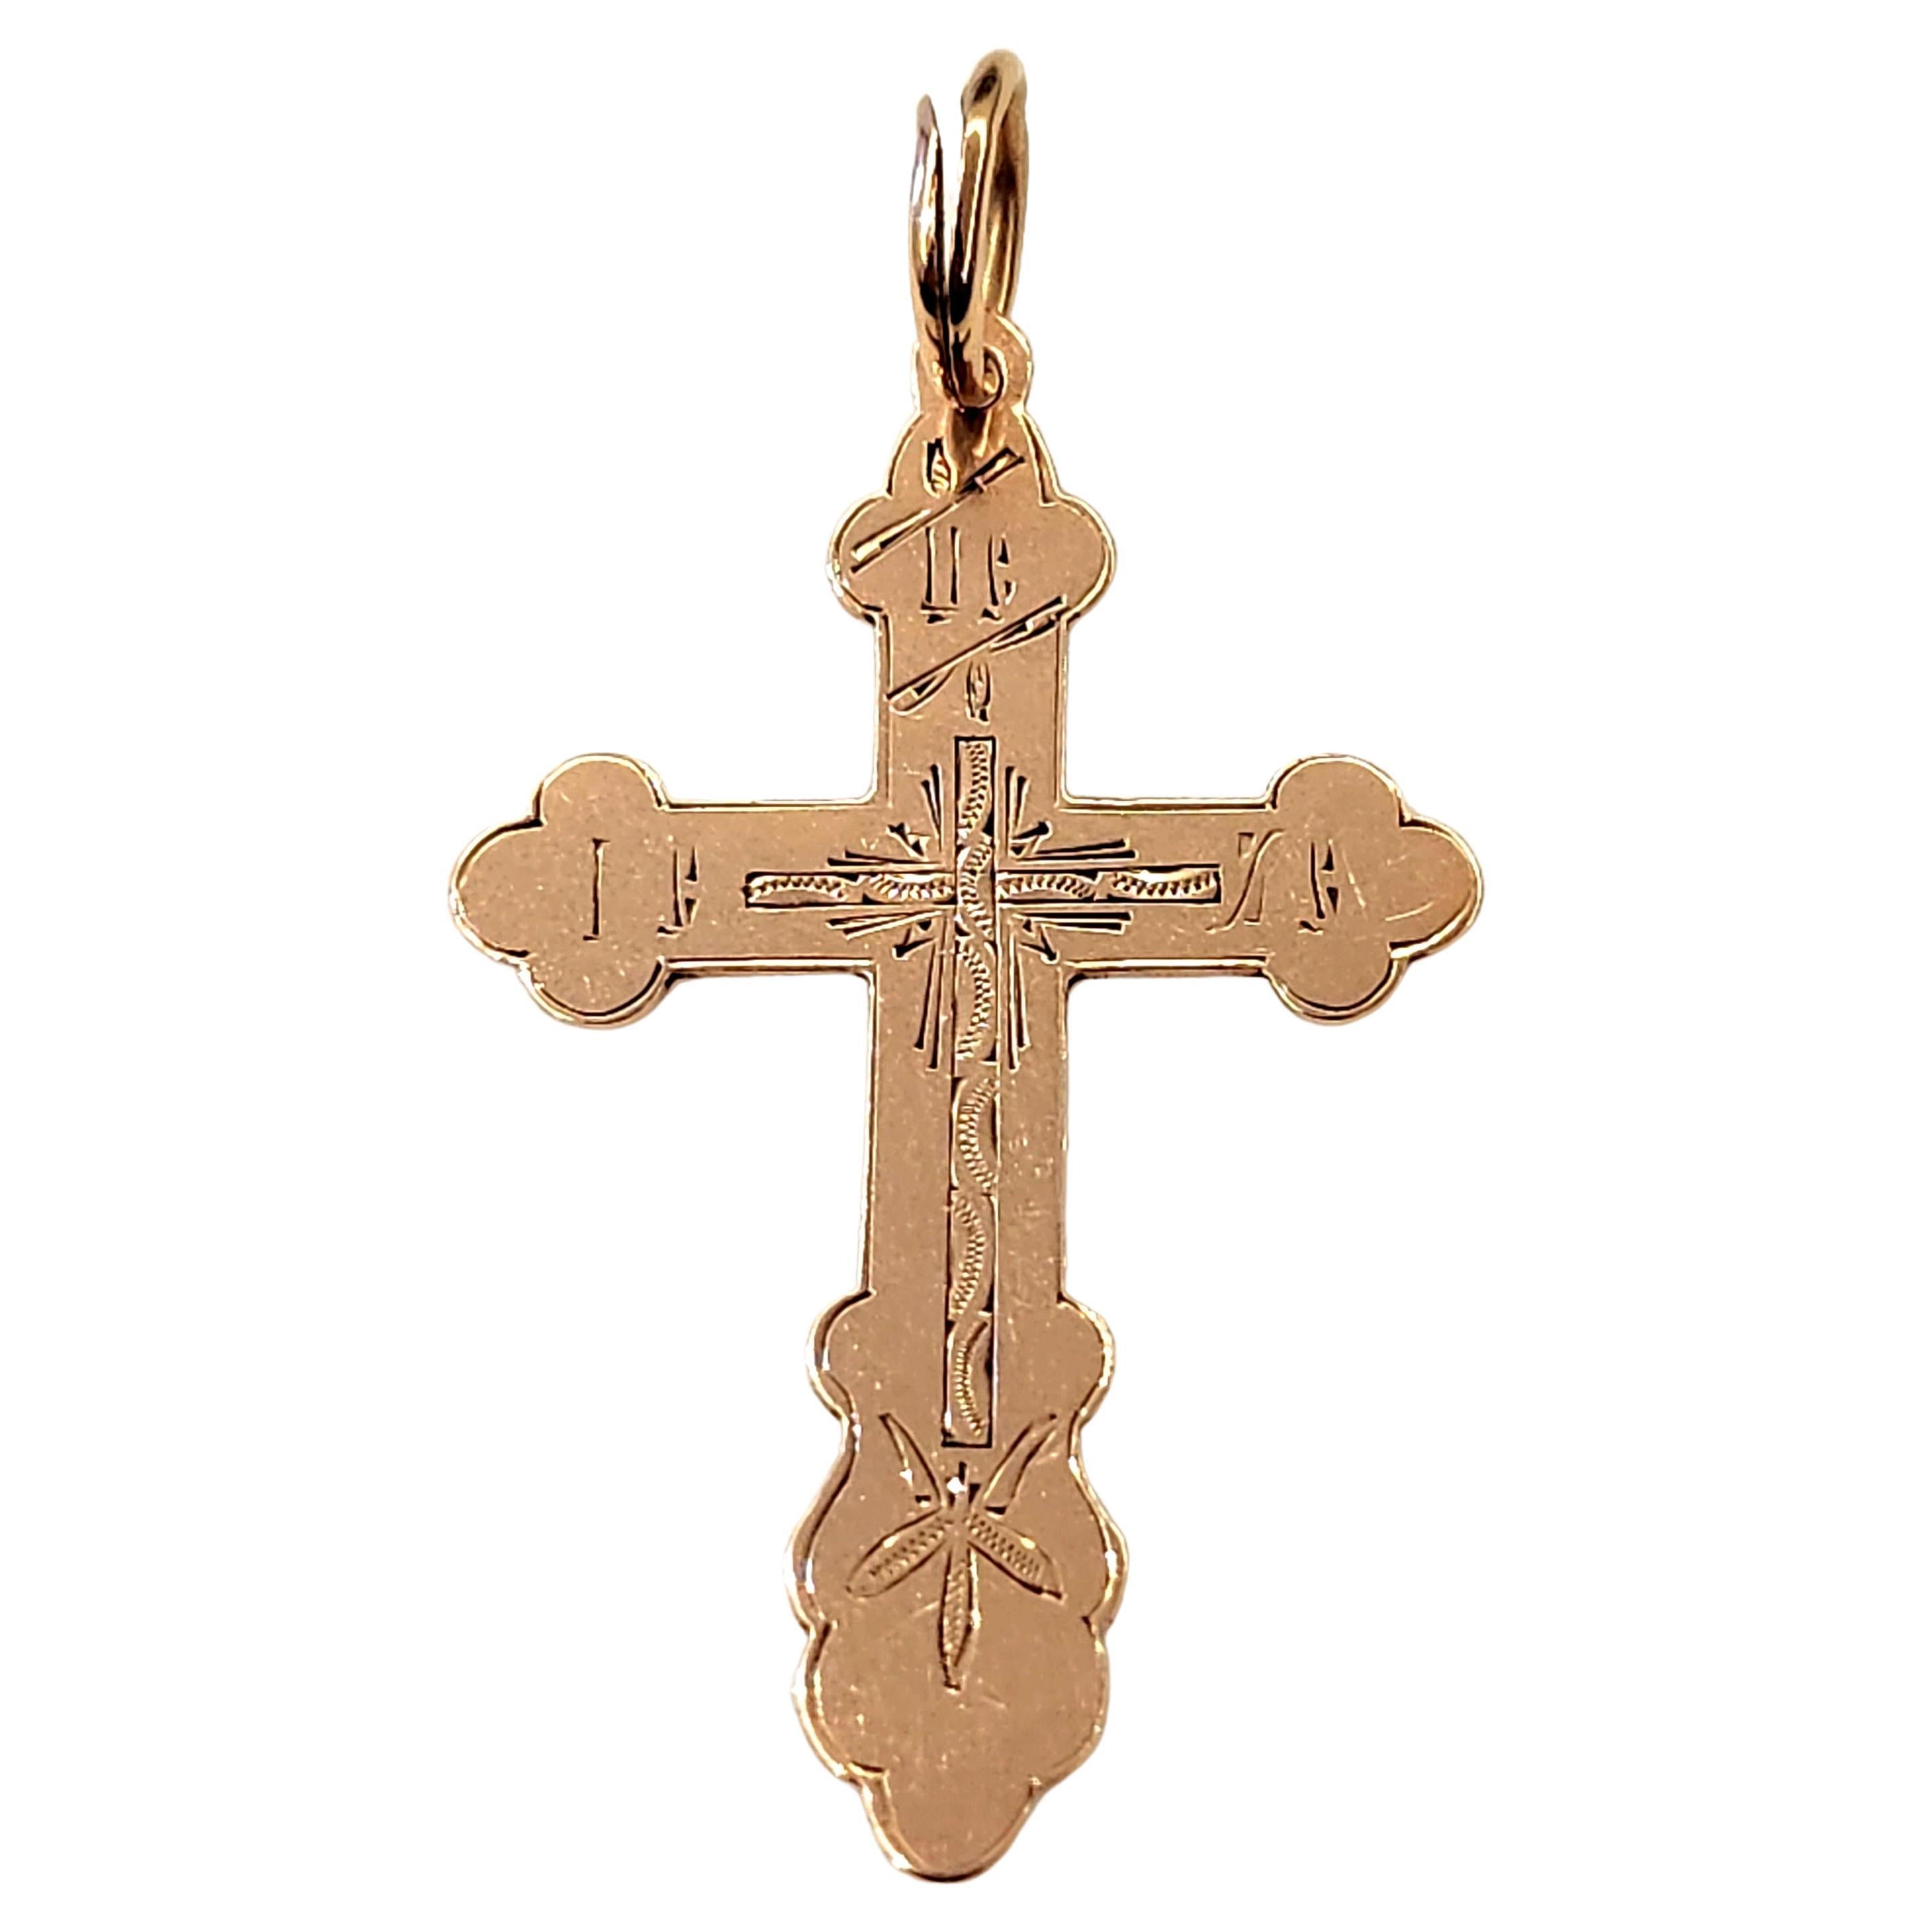 Antique large russian 14k gold cross pendant with engraved detailed work on front written on the back spaci sokrani or save and protect cross was made in moscow during the imperial russian era 1907.c hall marked 56 imperial russian gold standard and